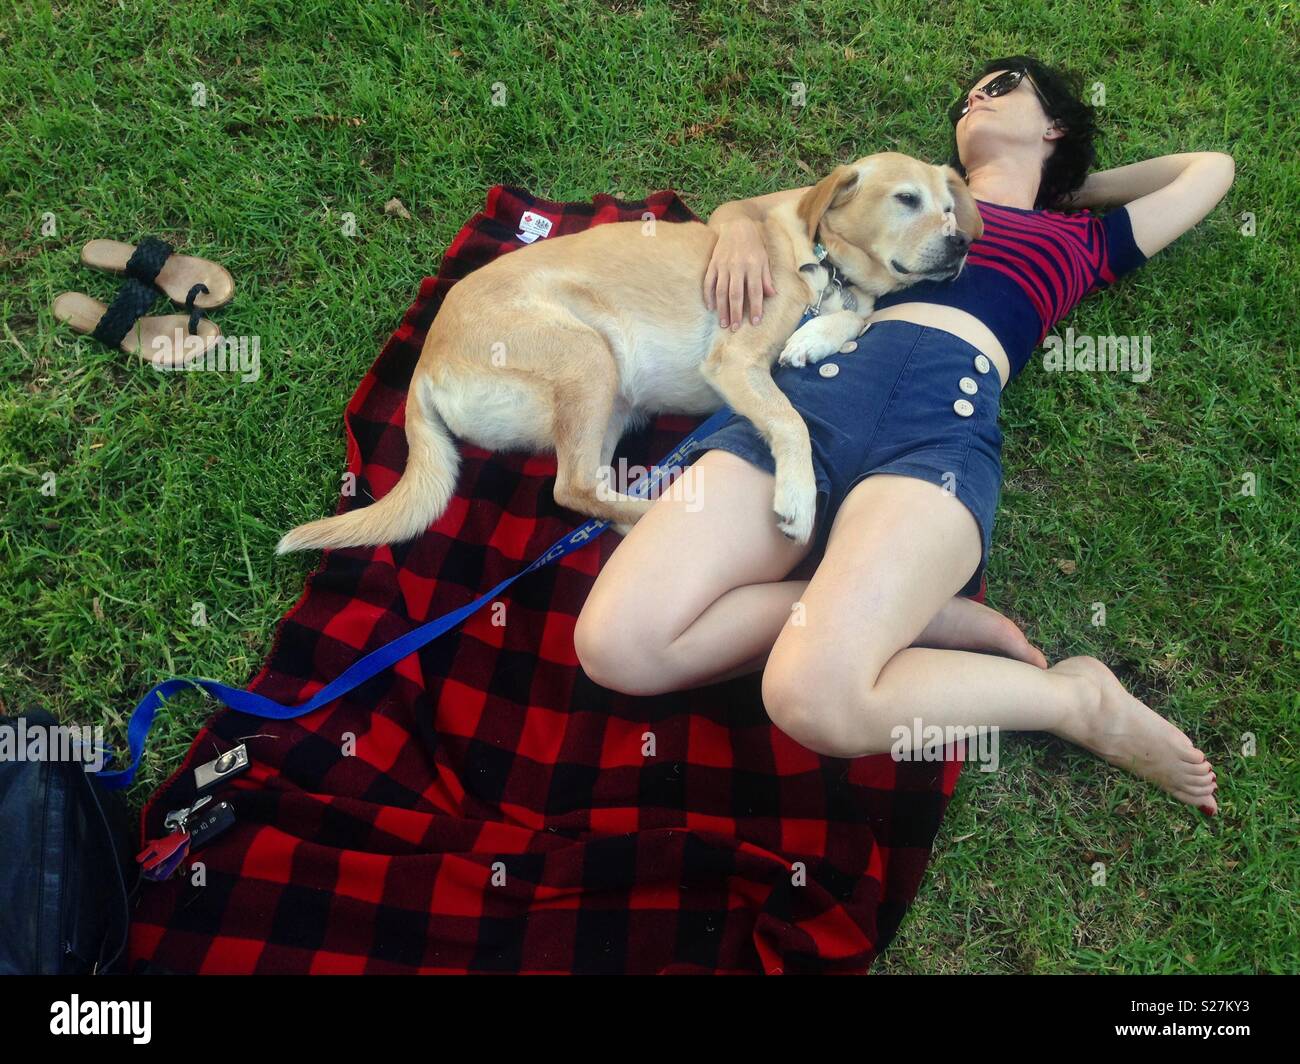 Woman lying  down with her blonde Labrador dog on picnic blanket and grass in Summer Stock Photo